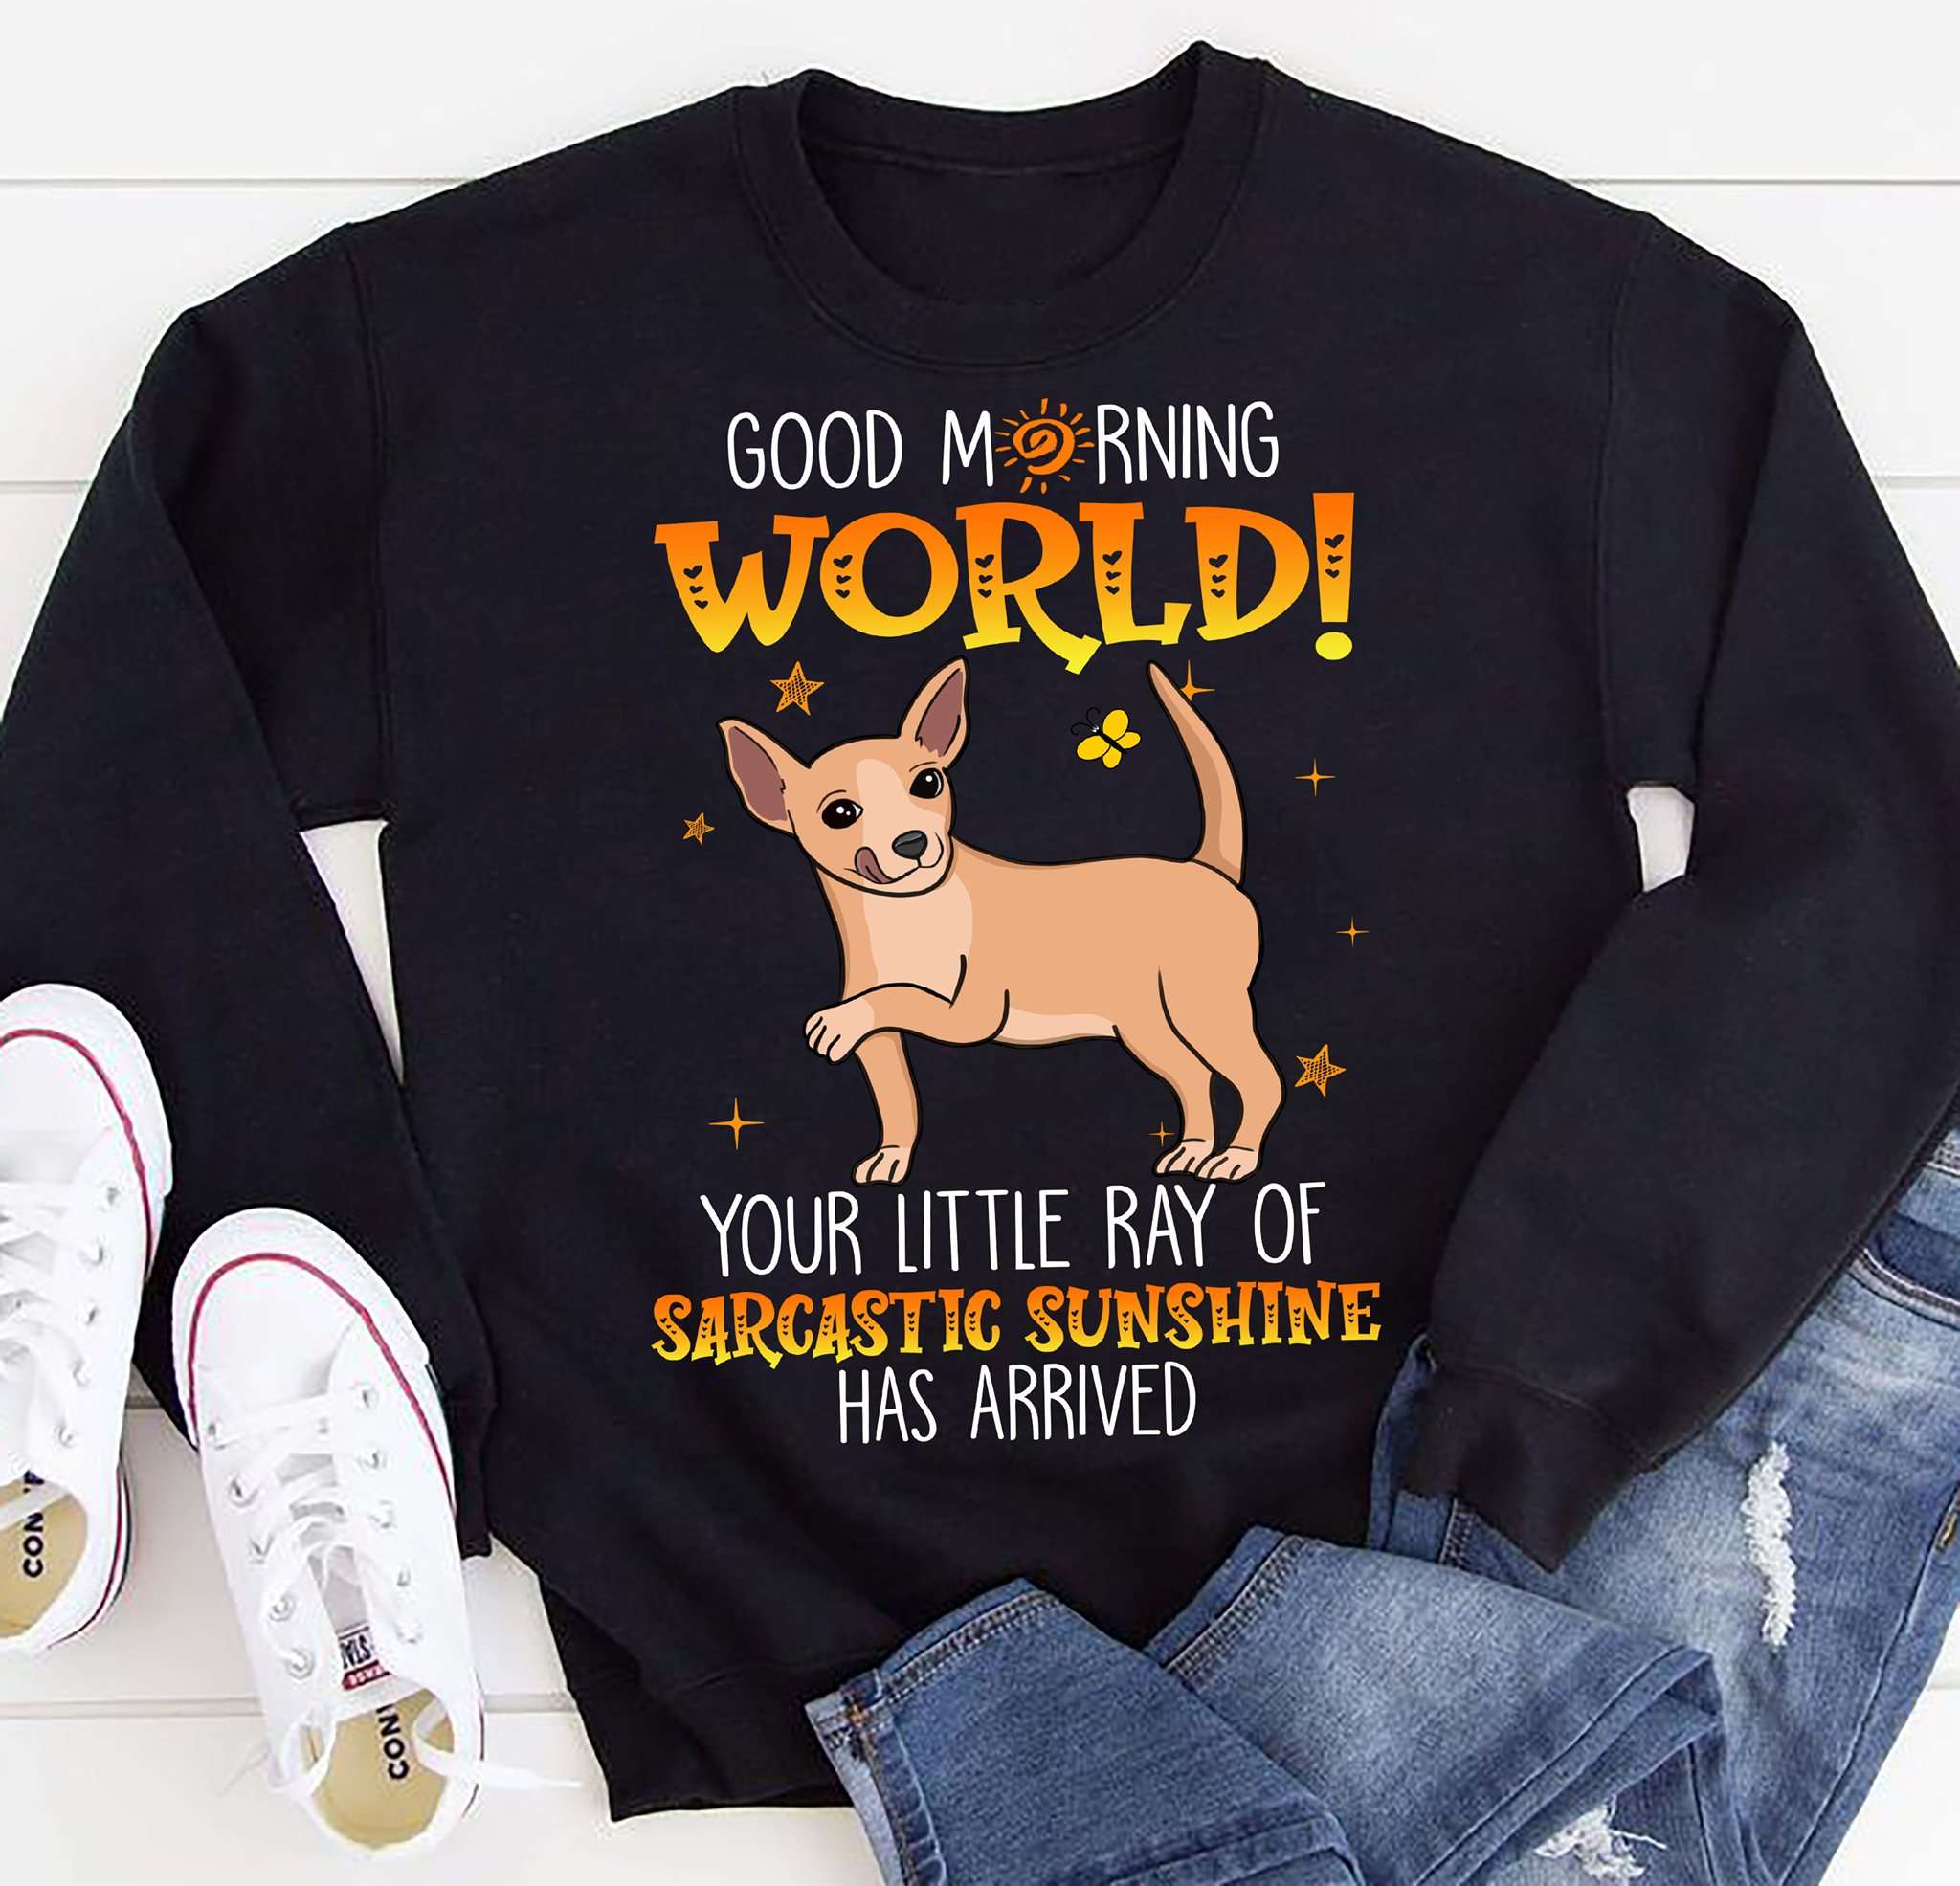 Good morning world, your little ray of sarcastic sunshine has arrived - Chihuahua dog lover